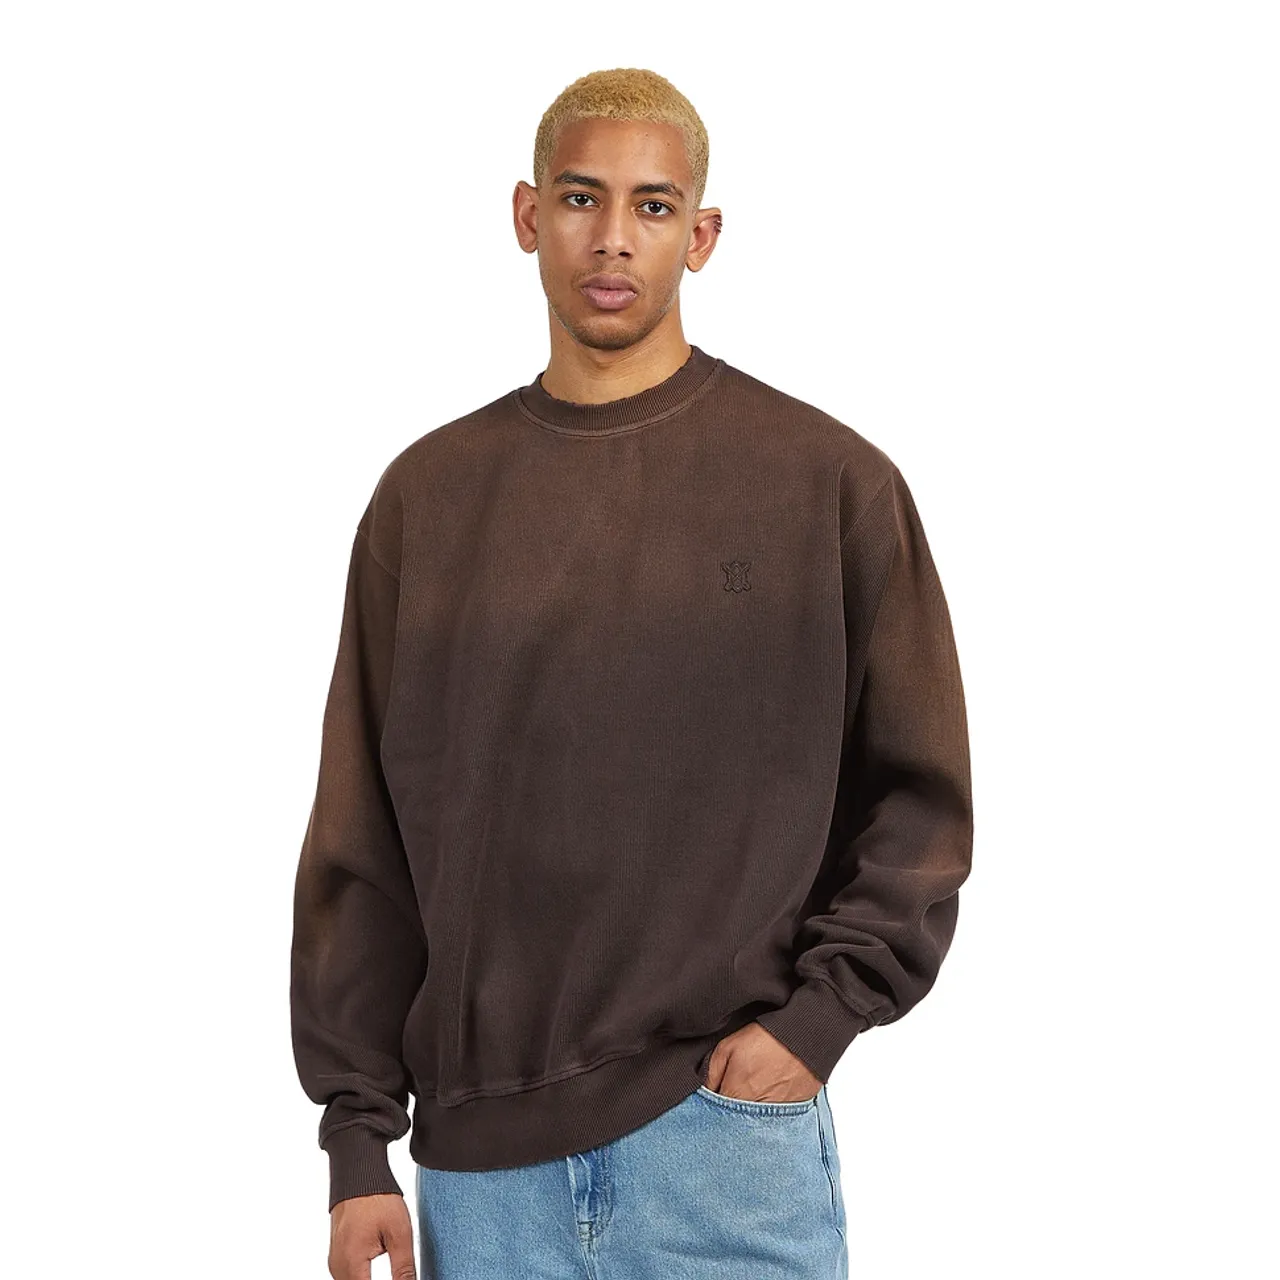 Rodell Sweater